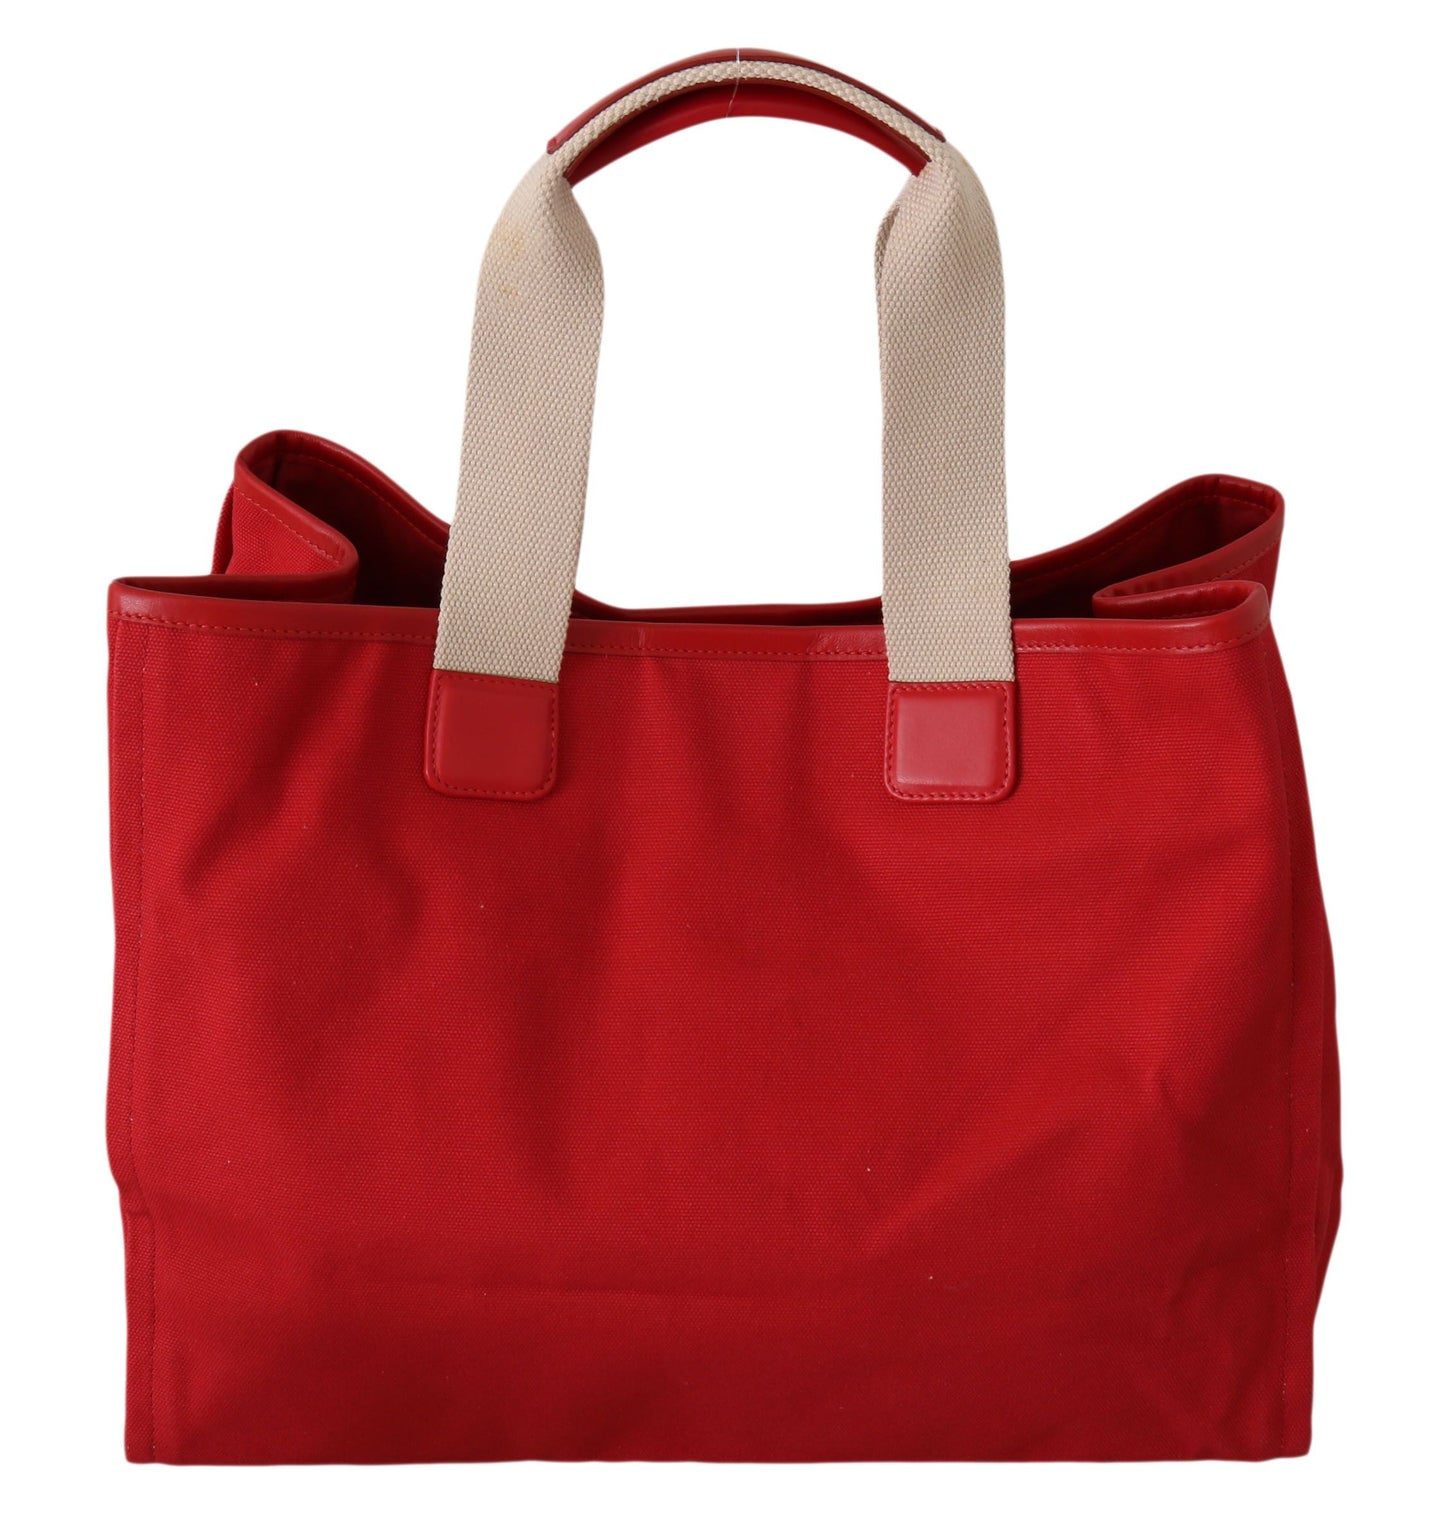 Chic Red Cotton Leather Tote Travel Bag